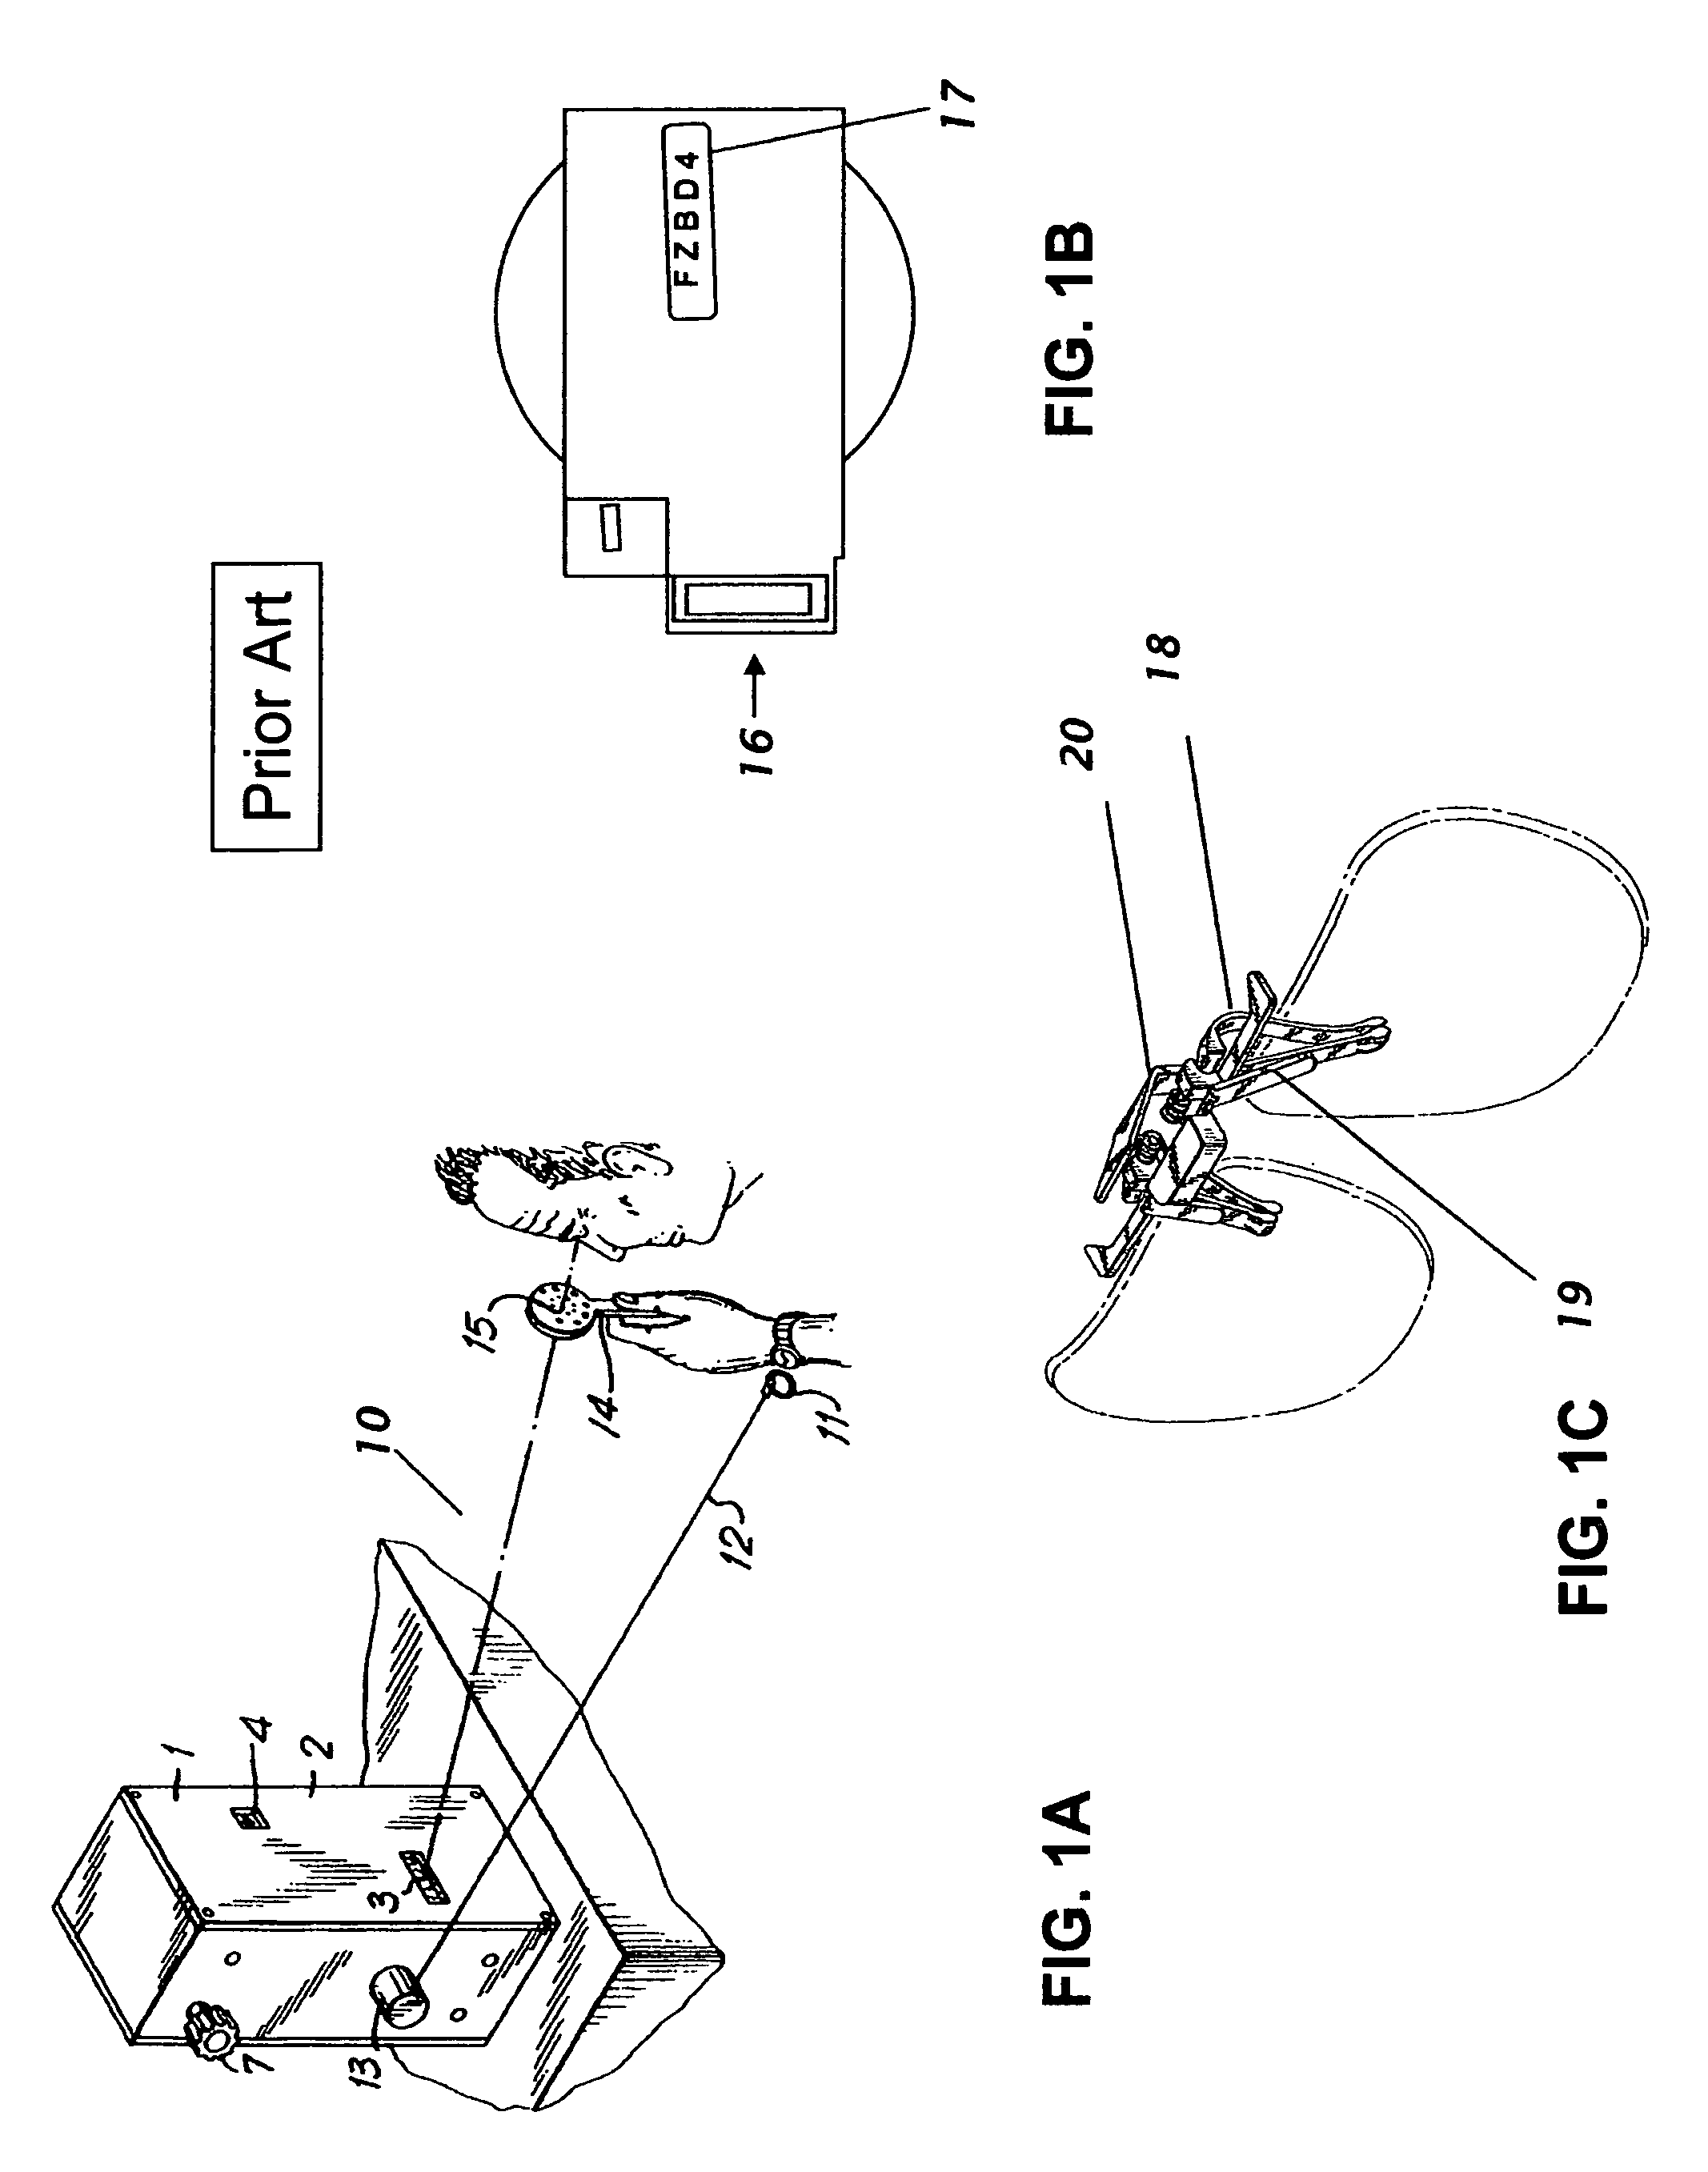 Hand-held device for contrast and multifunction vision testing